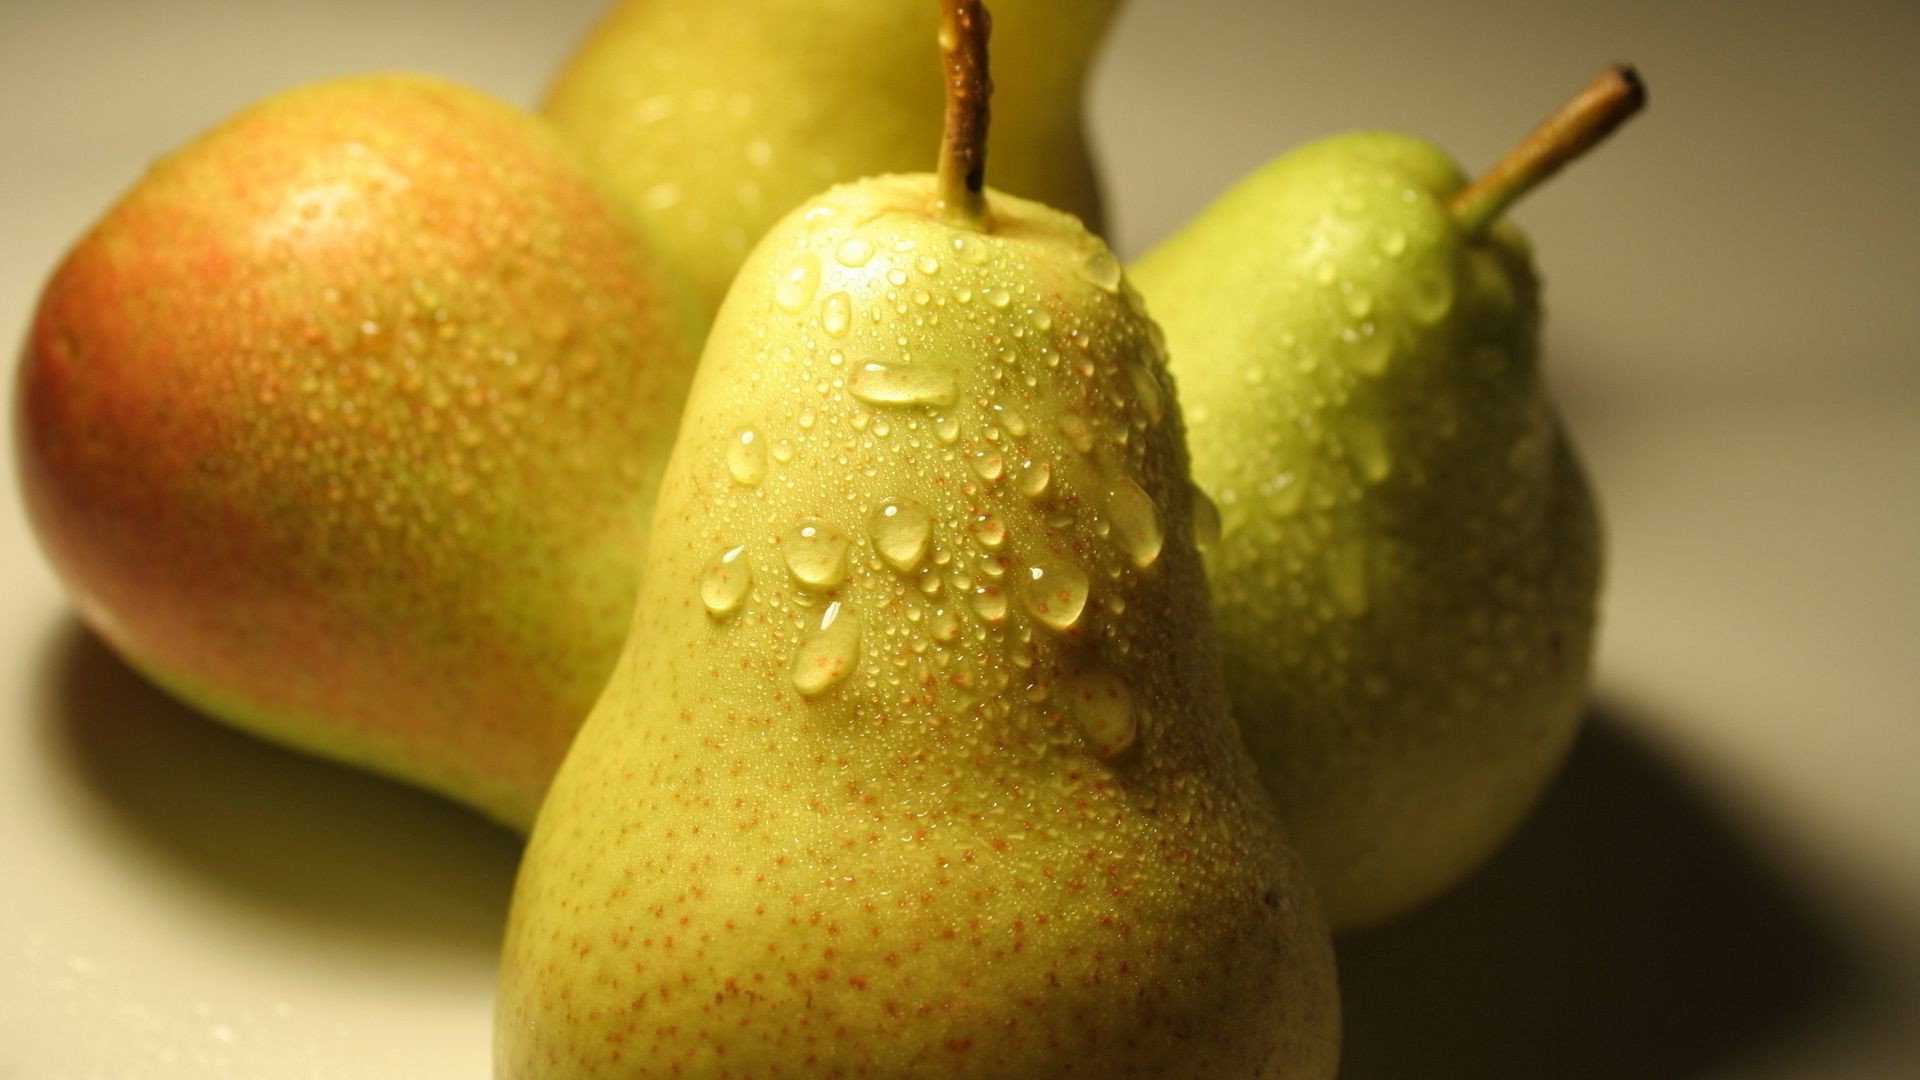 fruit juicy pear apple food grow health half still life nutrition nature delicious leaf fall confection vitamin